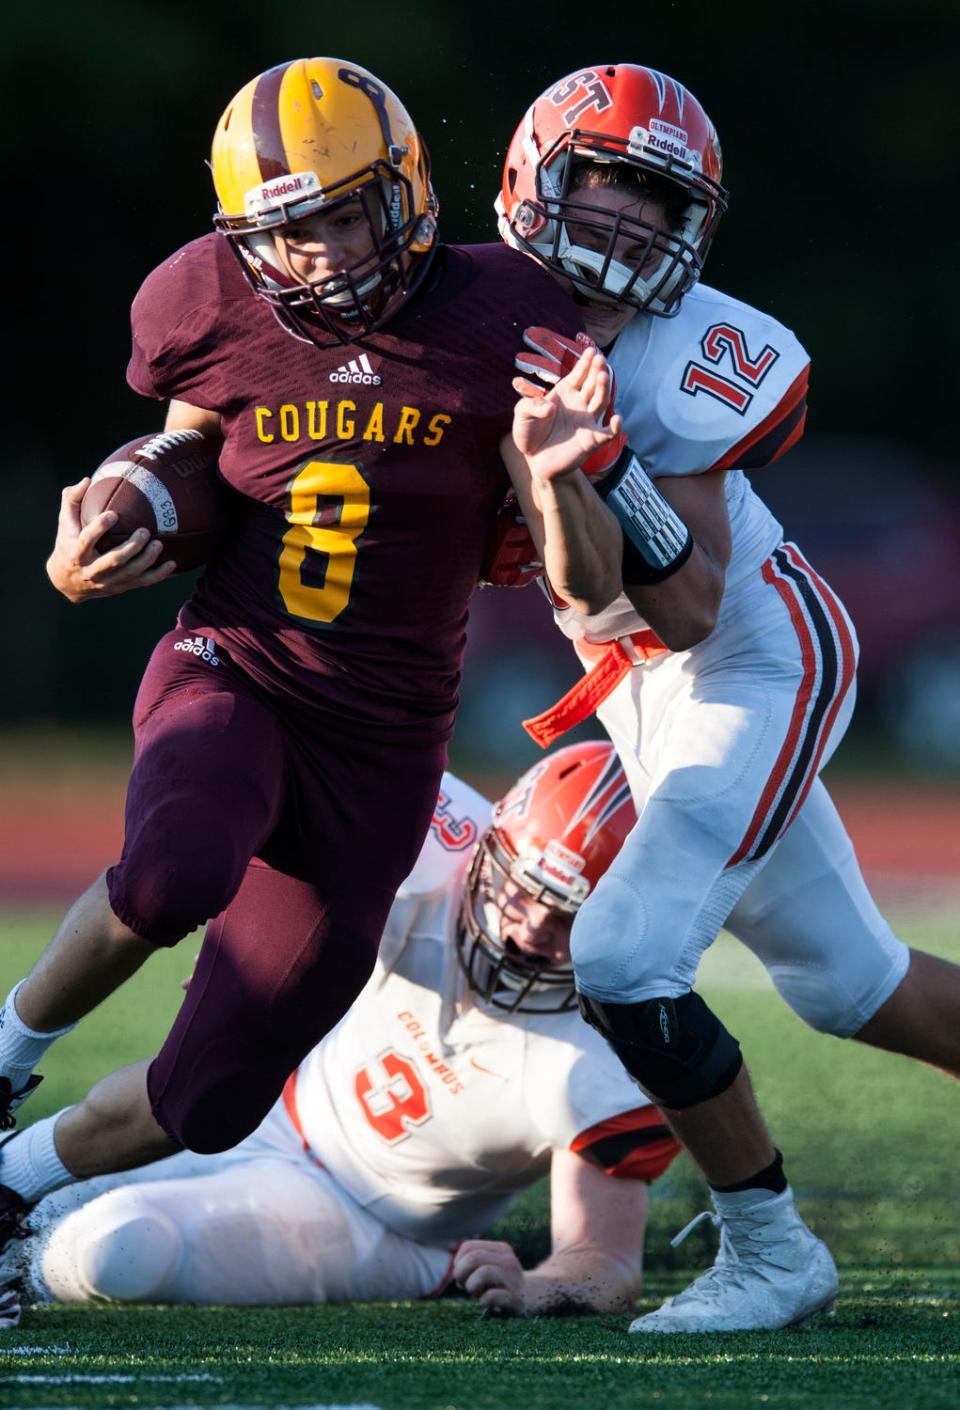 North running back Xavier Trueblood (8) takes a hit from Columbus East defensive back Jonah Wichman (12) during Bloomington North's 42-17 loss to Columbus East in August of 2017. Both schools are now in the same Class 5A sectional, along with Bloomington South and Seymour.